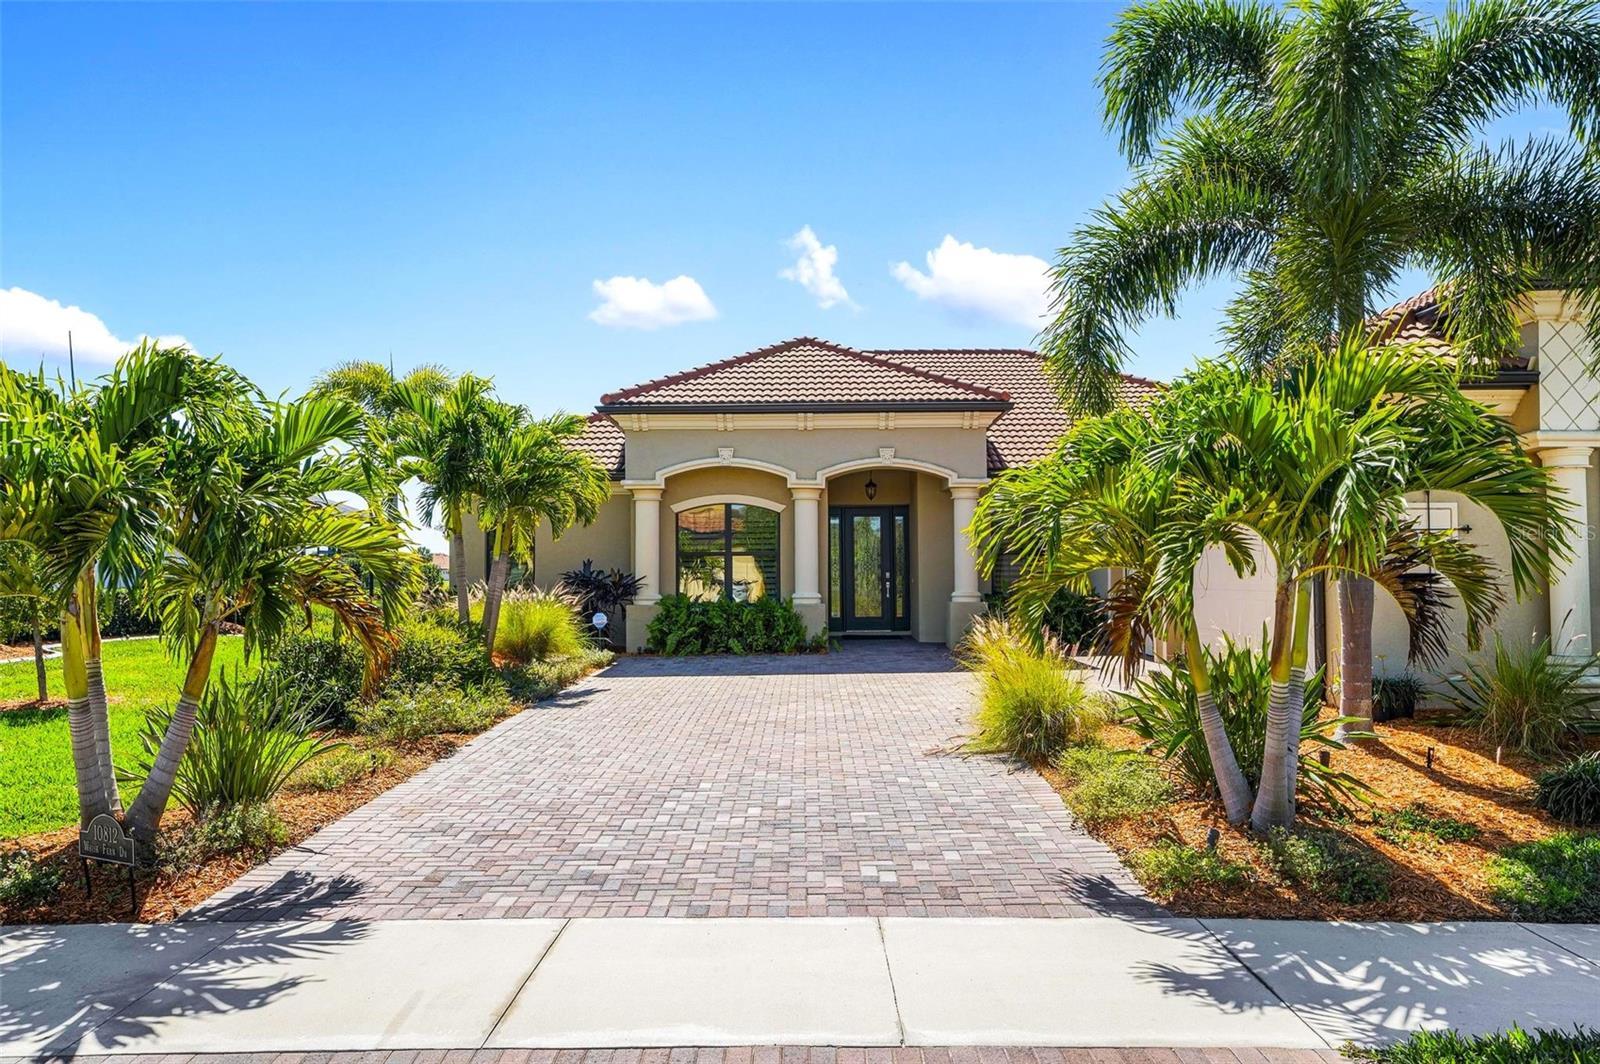 Photo one of 10812 Whisk Fern Dr Venice FL 34293 | MLS A4601369